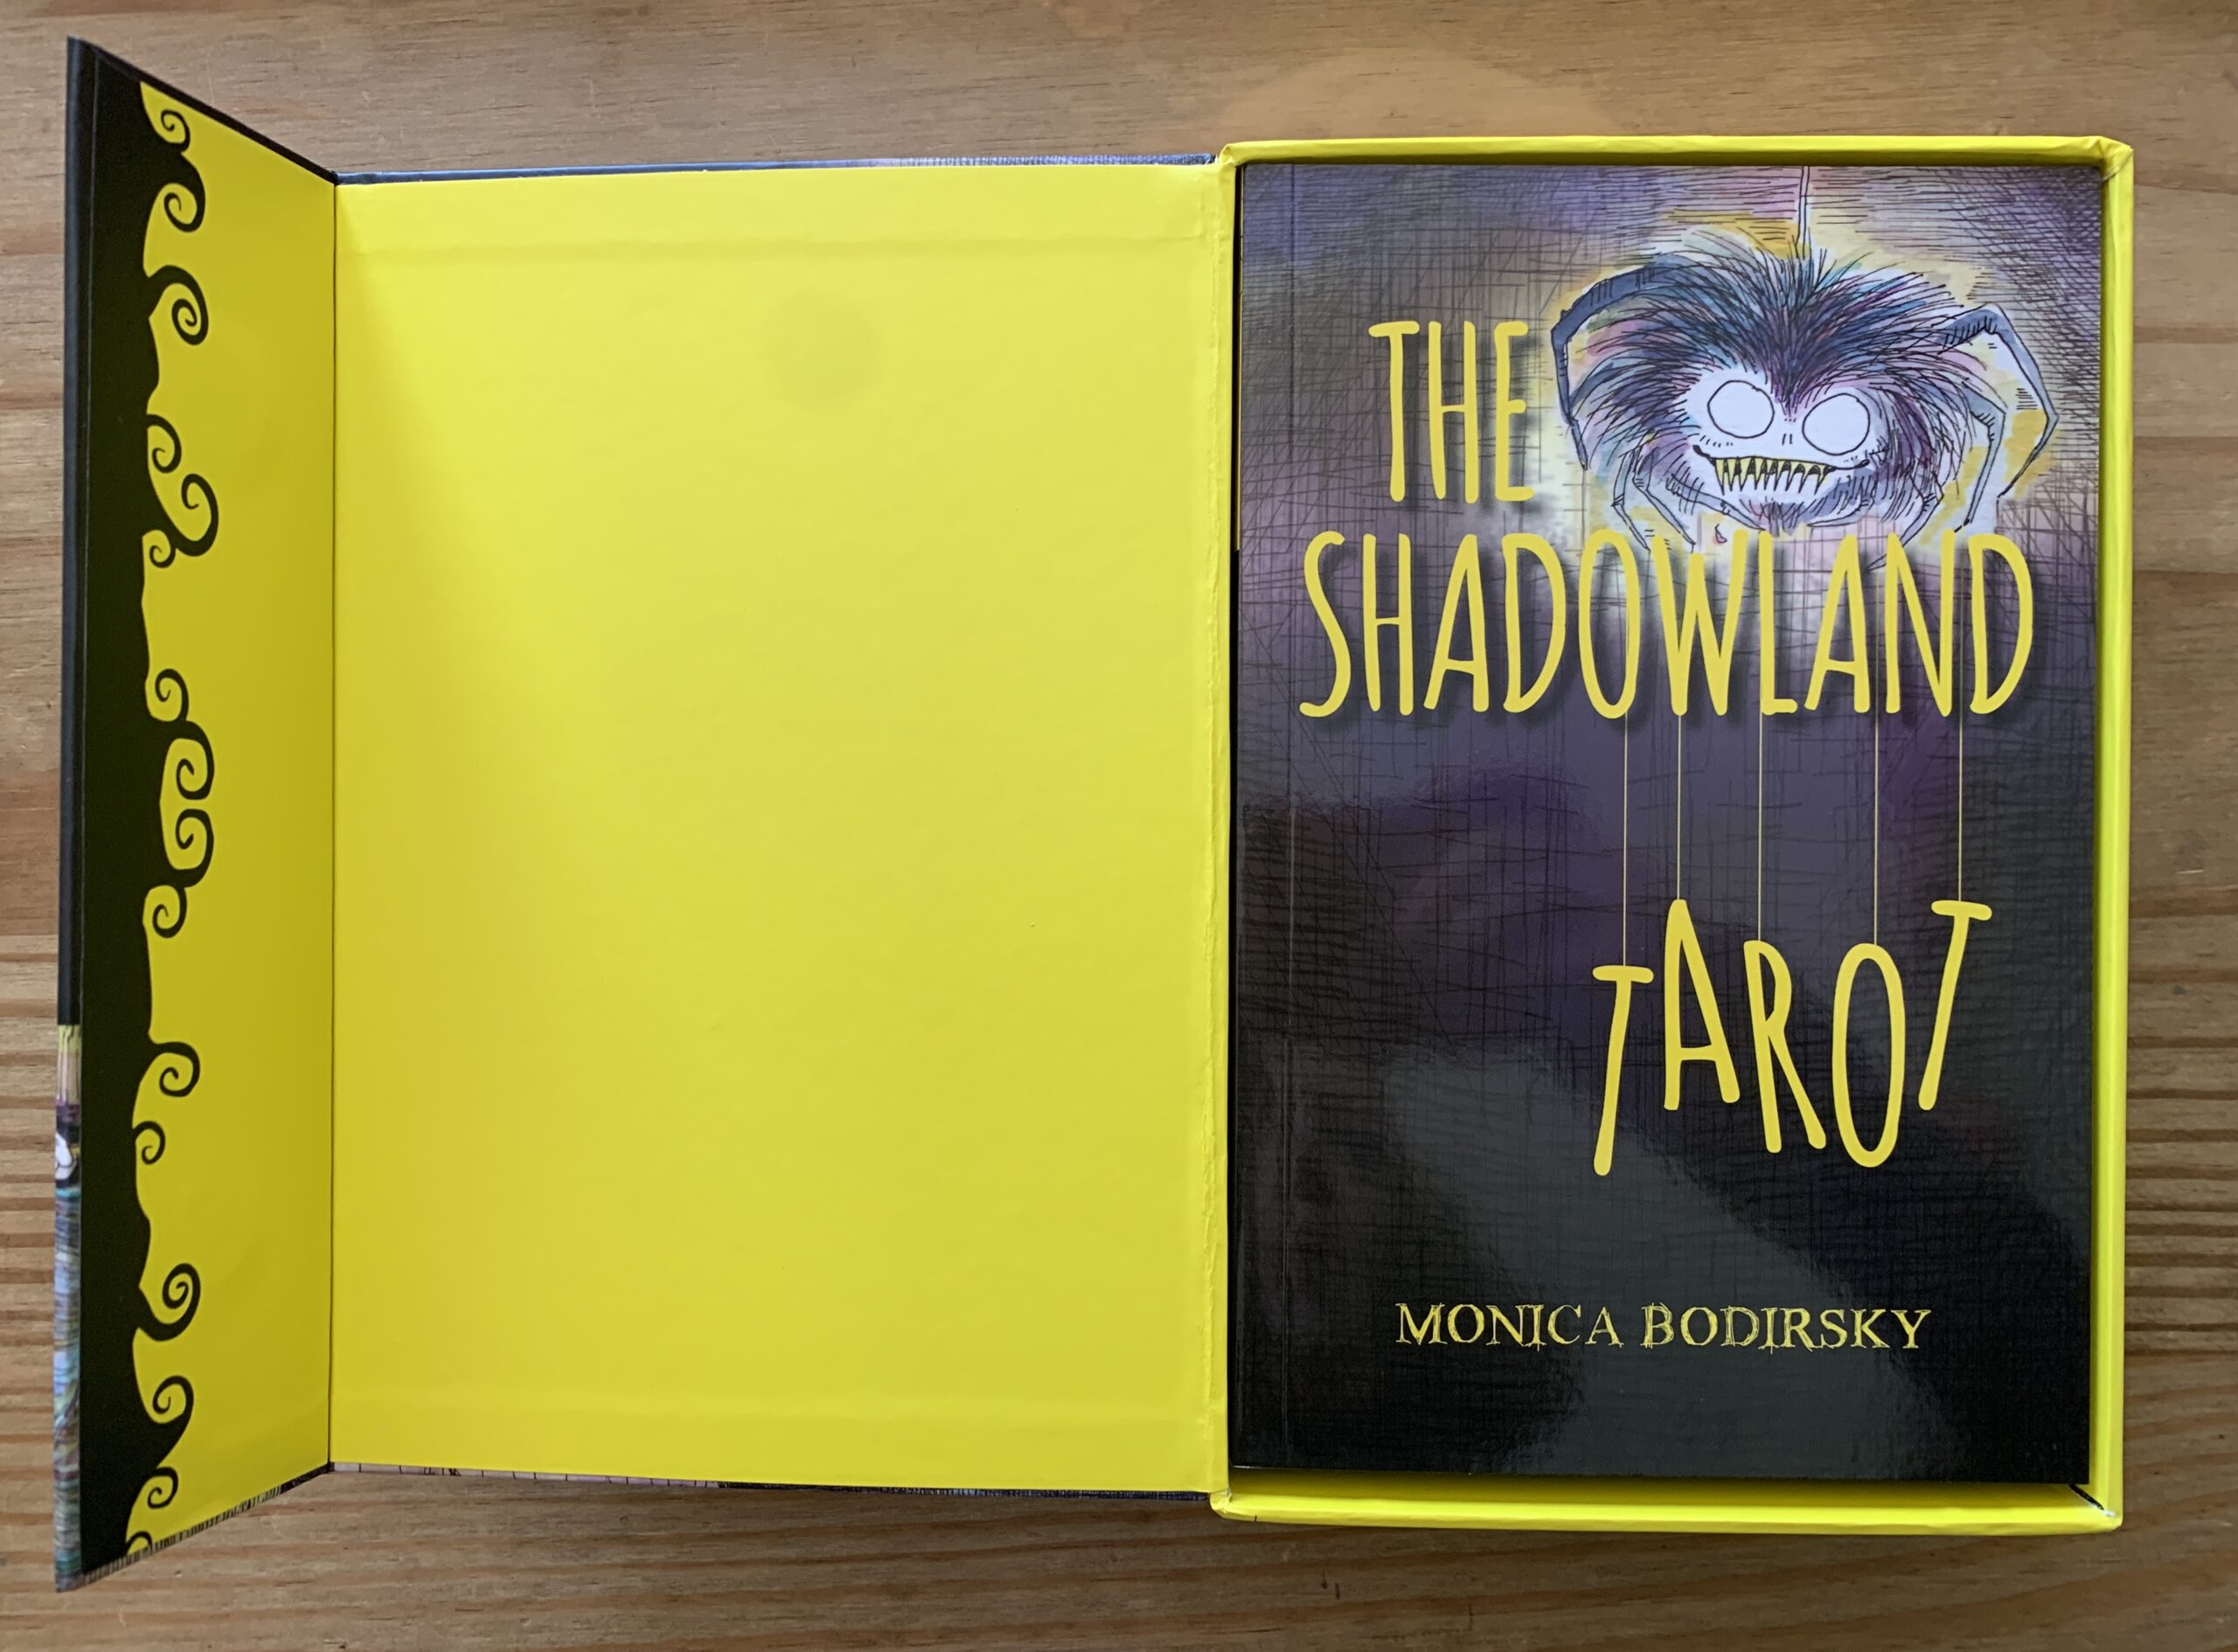 Reviewing & Reading With Monica Bodirsky's Shadowland Tarot